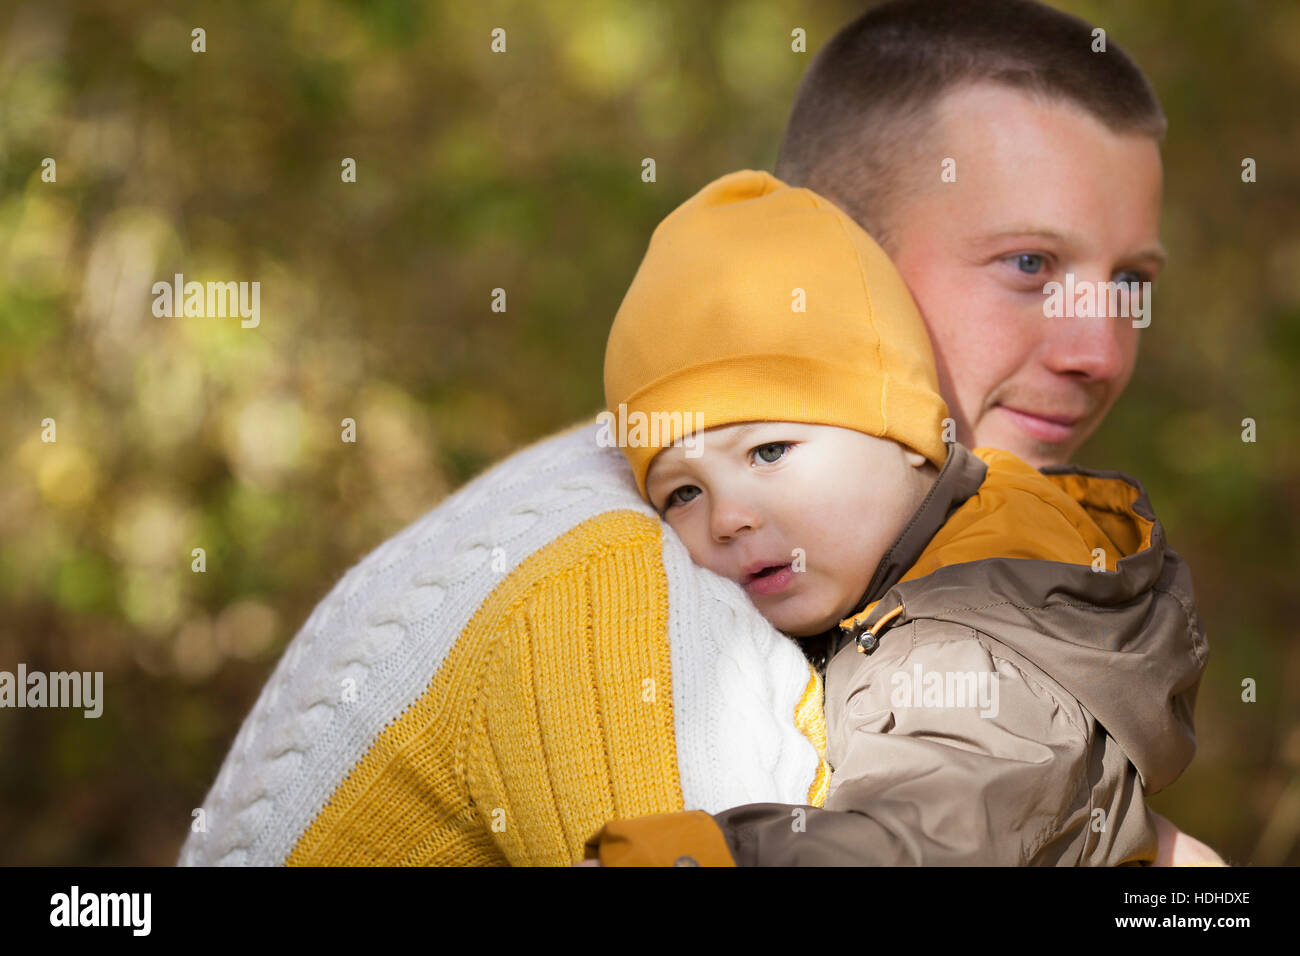 Cute baby boy being carried by thoughtful father at park during autumn Stock Photo